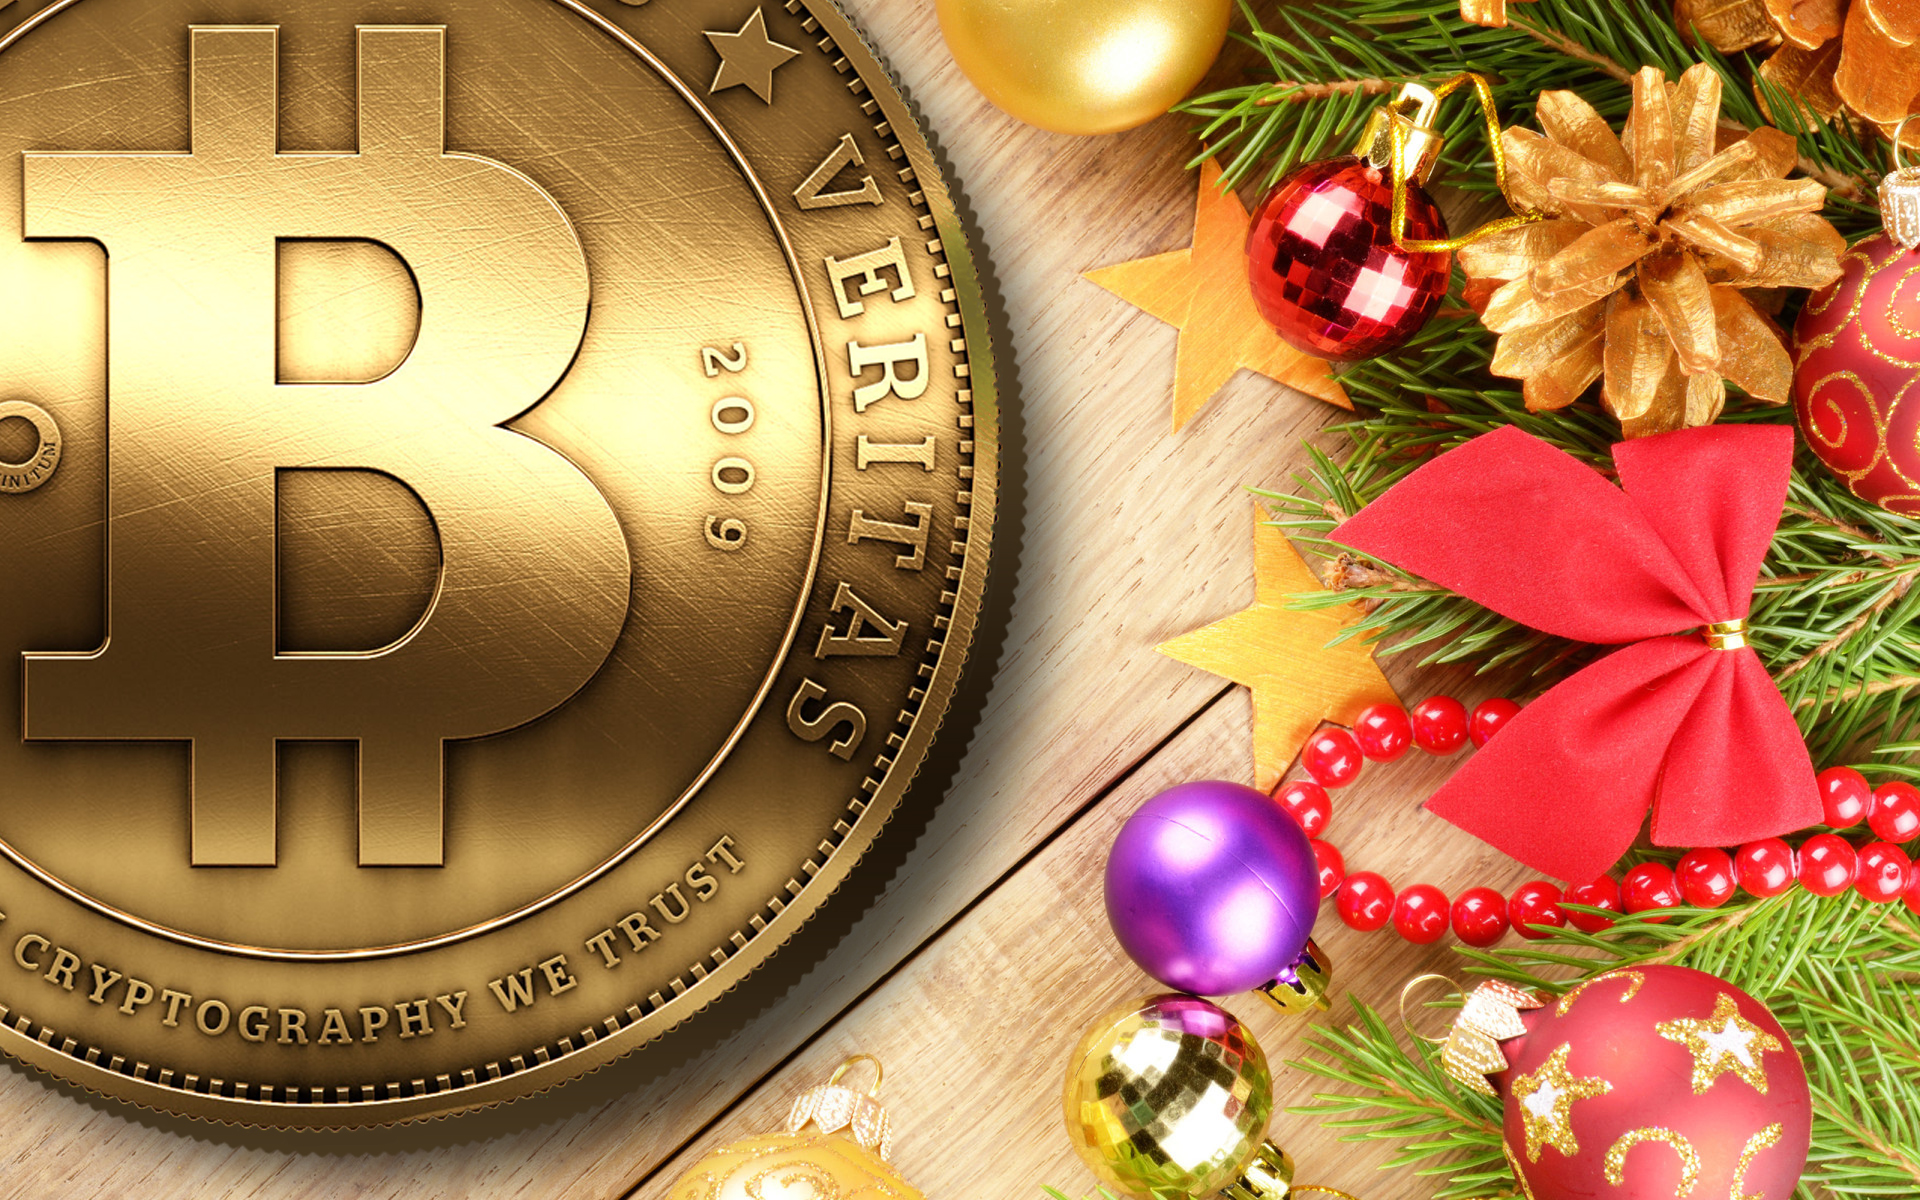 buy lastminute.com holiday gift card with bitcoin